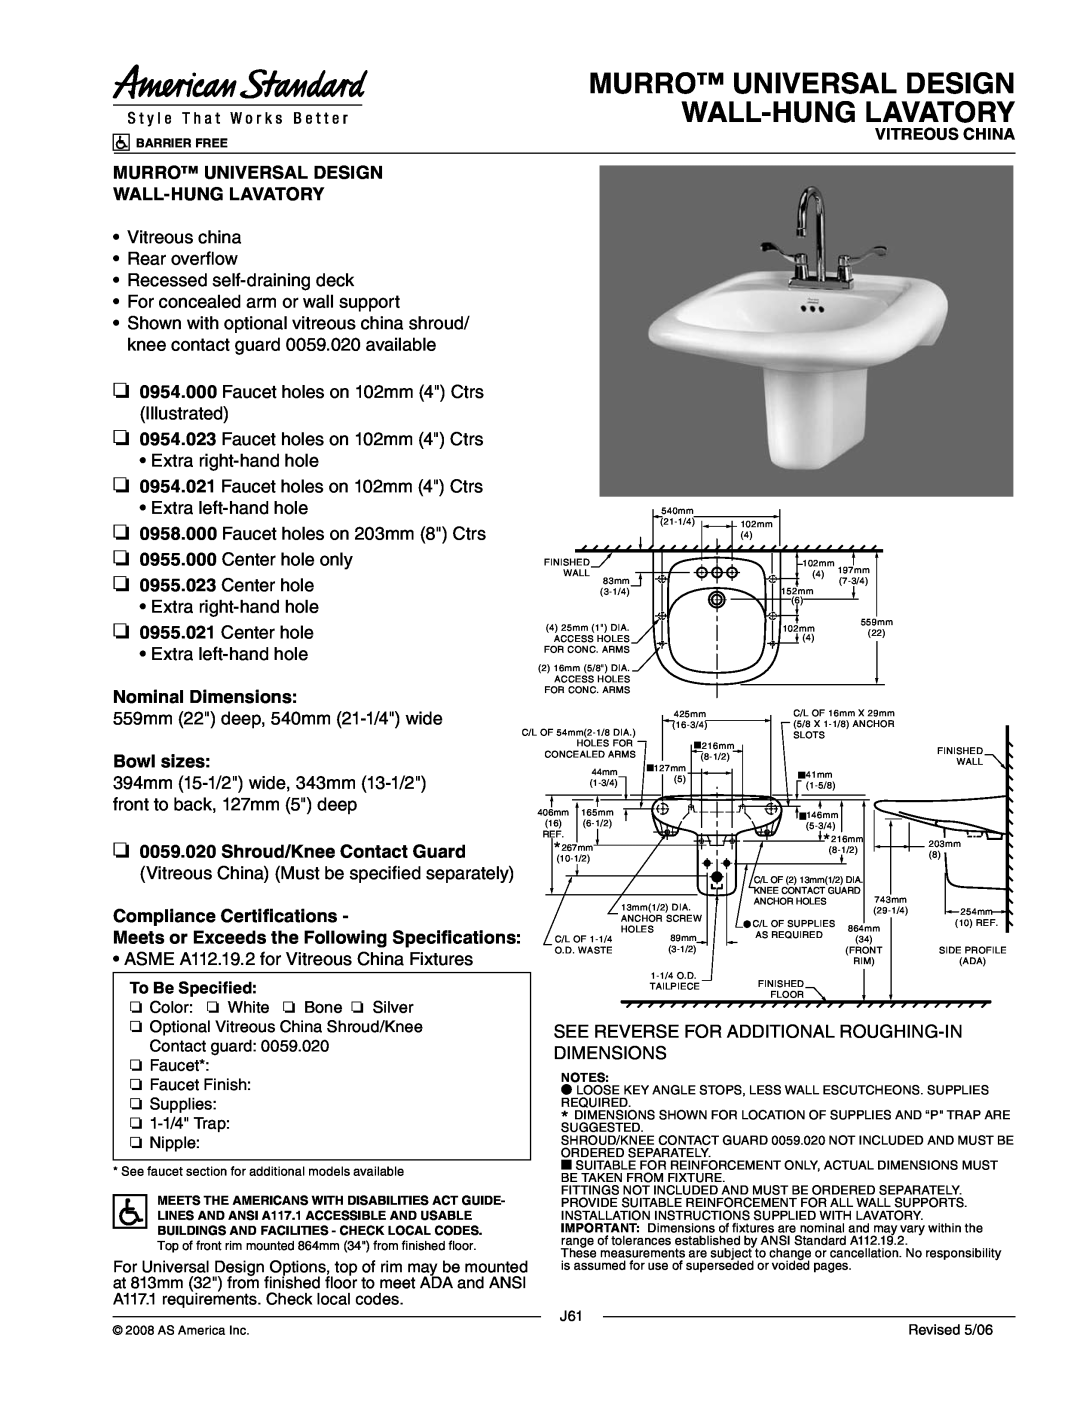 American Standard 0955.021 dimensions Nominal Dimensions, Bowl sizes, Shroud/Knee Contact Guard, Compliance Certifications 